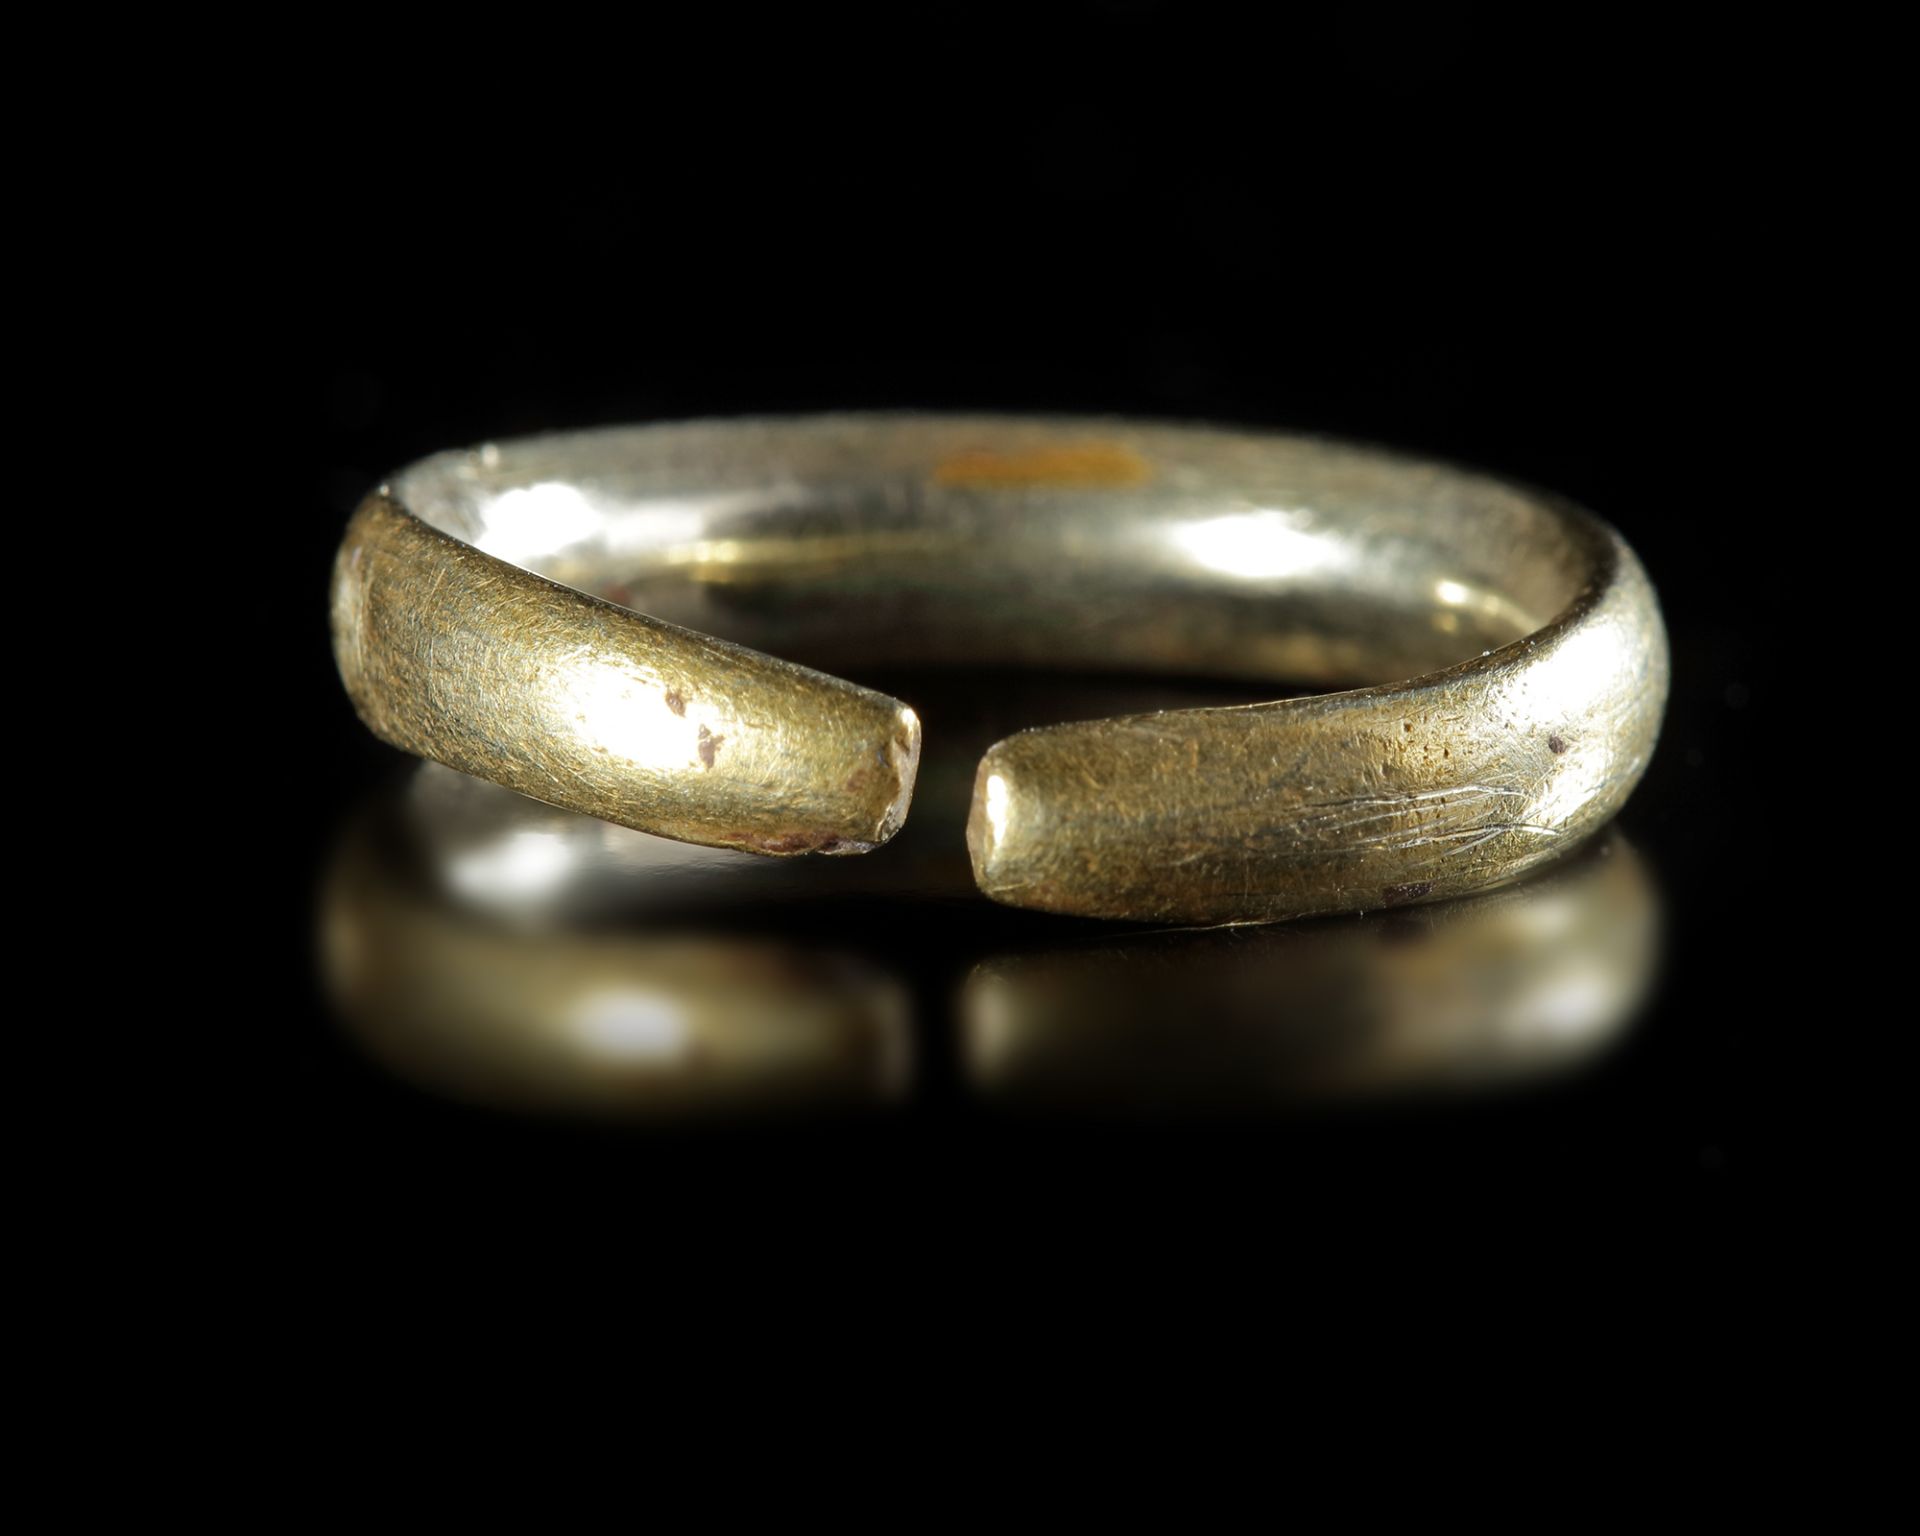 AN ELECTRUM RING WITH PHOENICIAN INSCRIPTION, 6-7TH CENTURY BC - Image 3 of 3